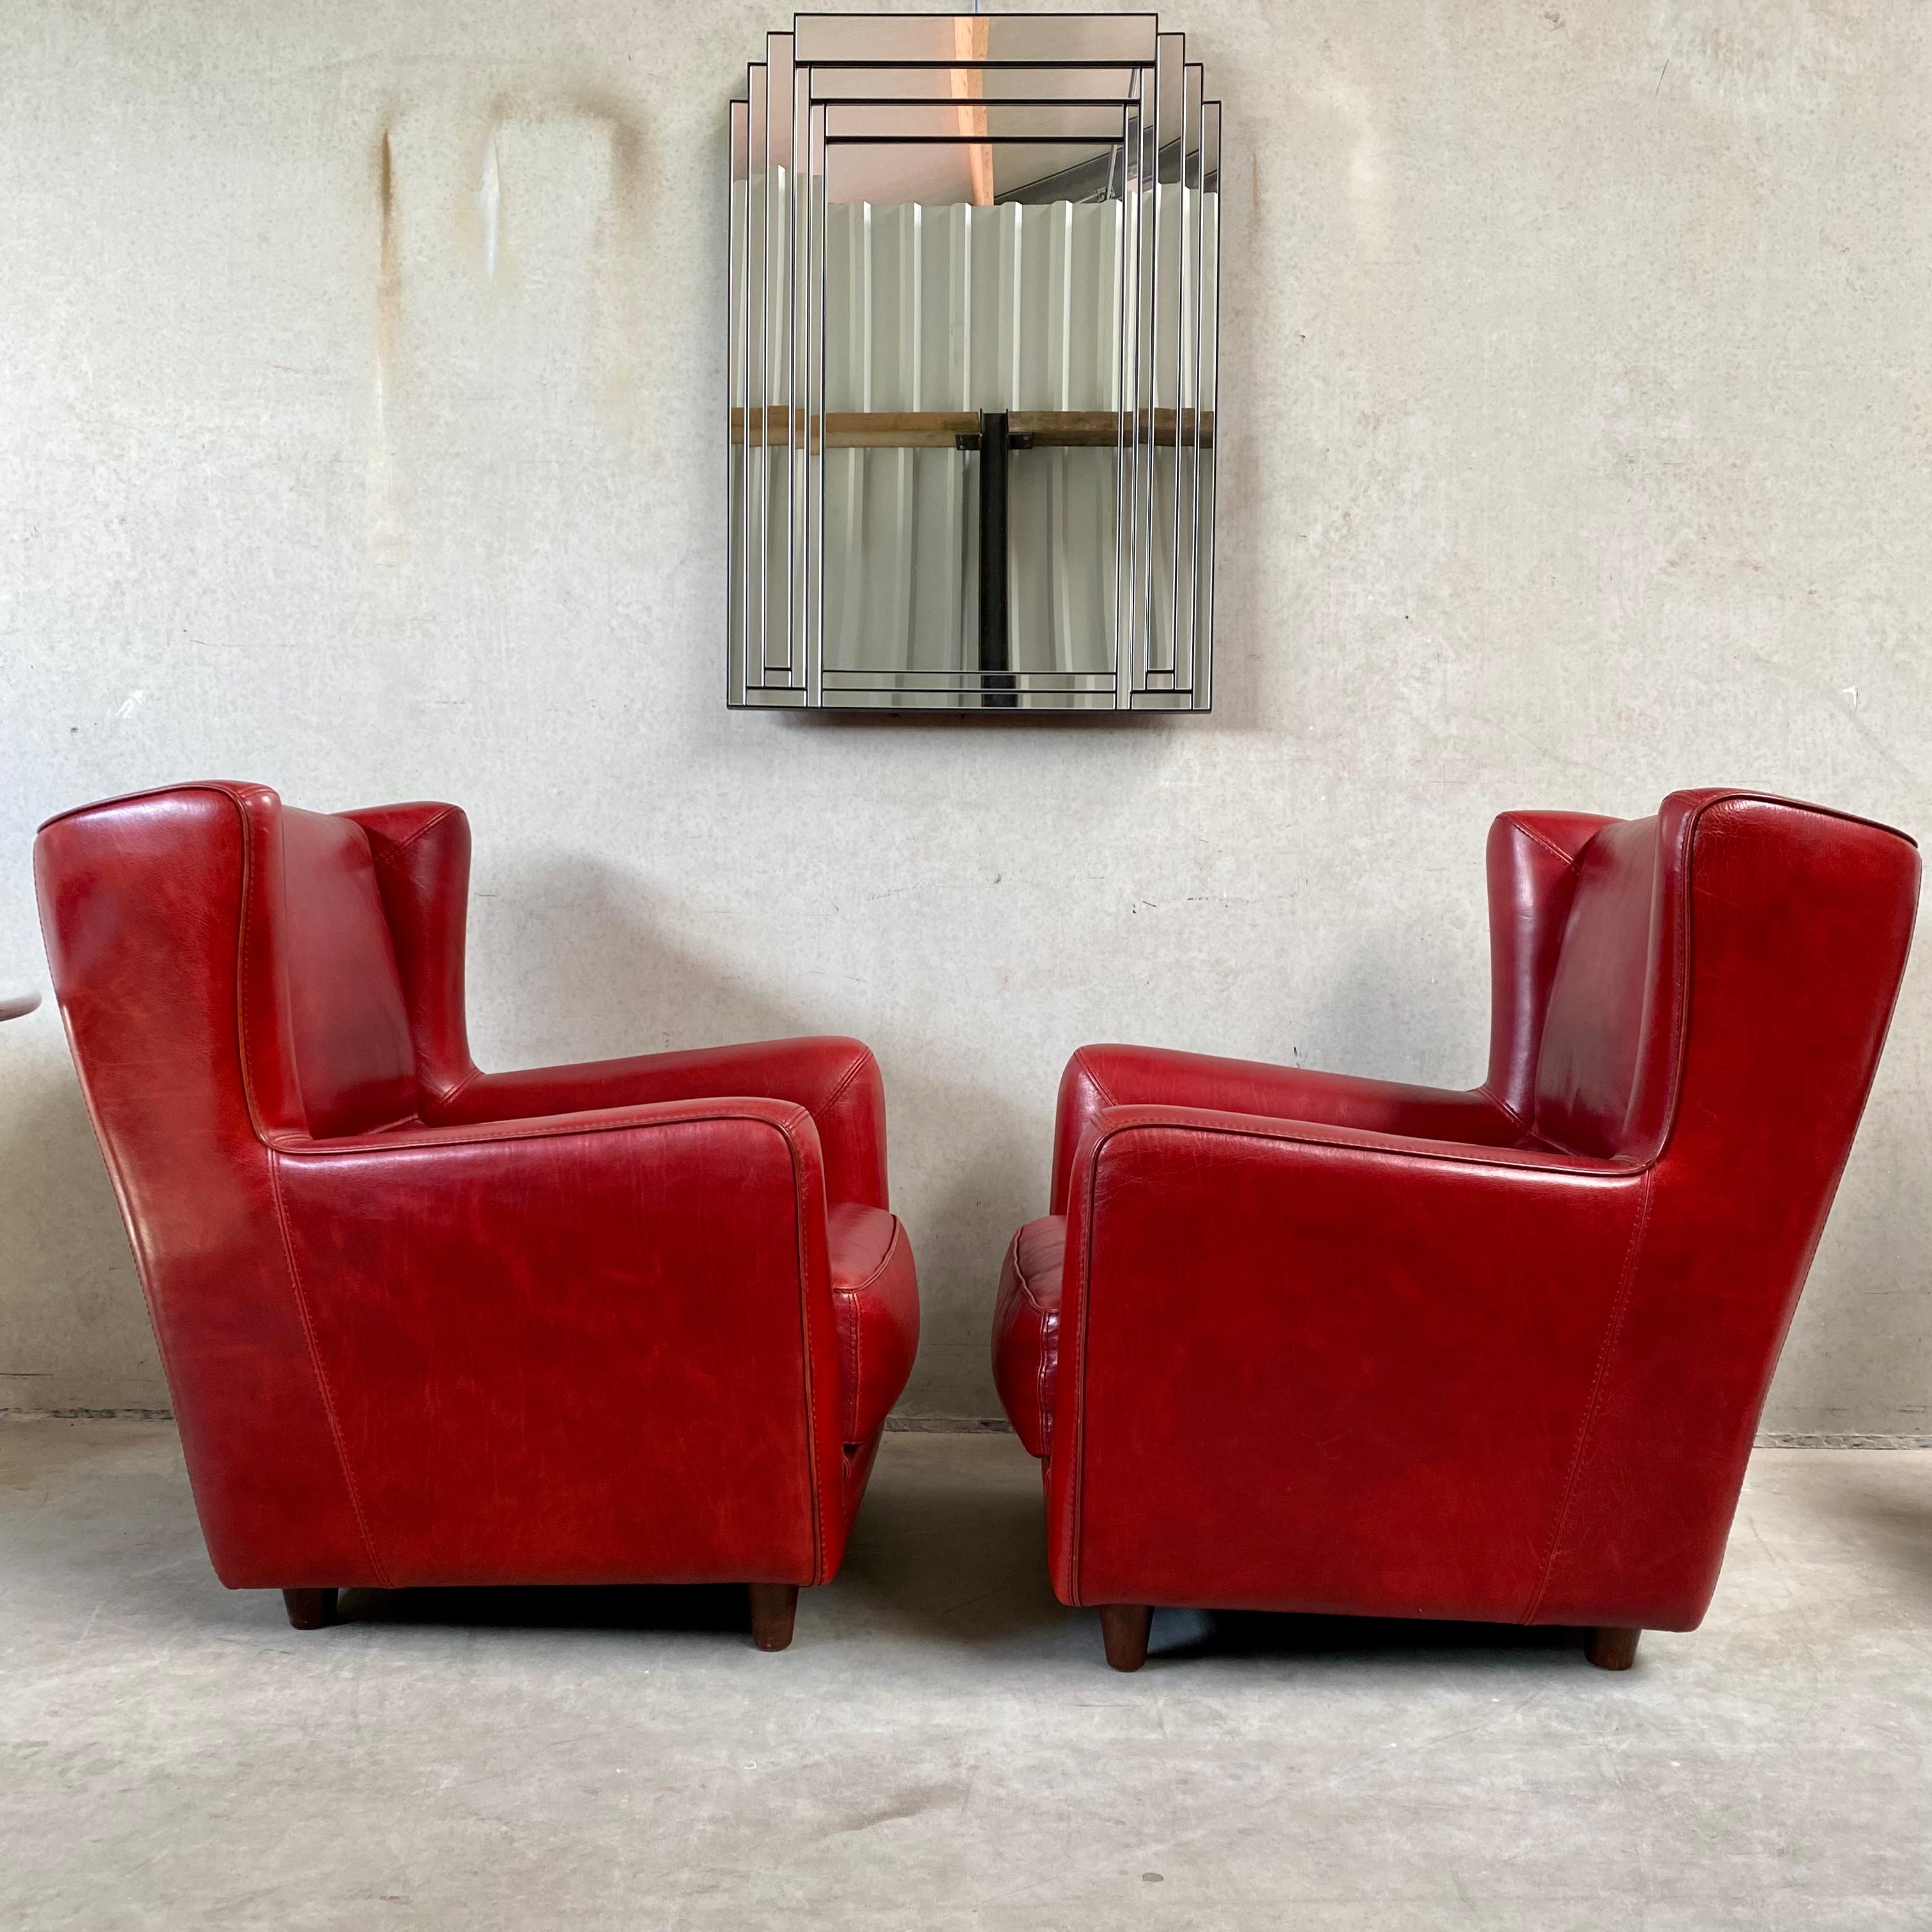 Art Deco Pair of Ox-Blood Red Leather Lounge Chairs Begére by Baxter Italy 90s For Sale